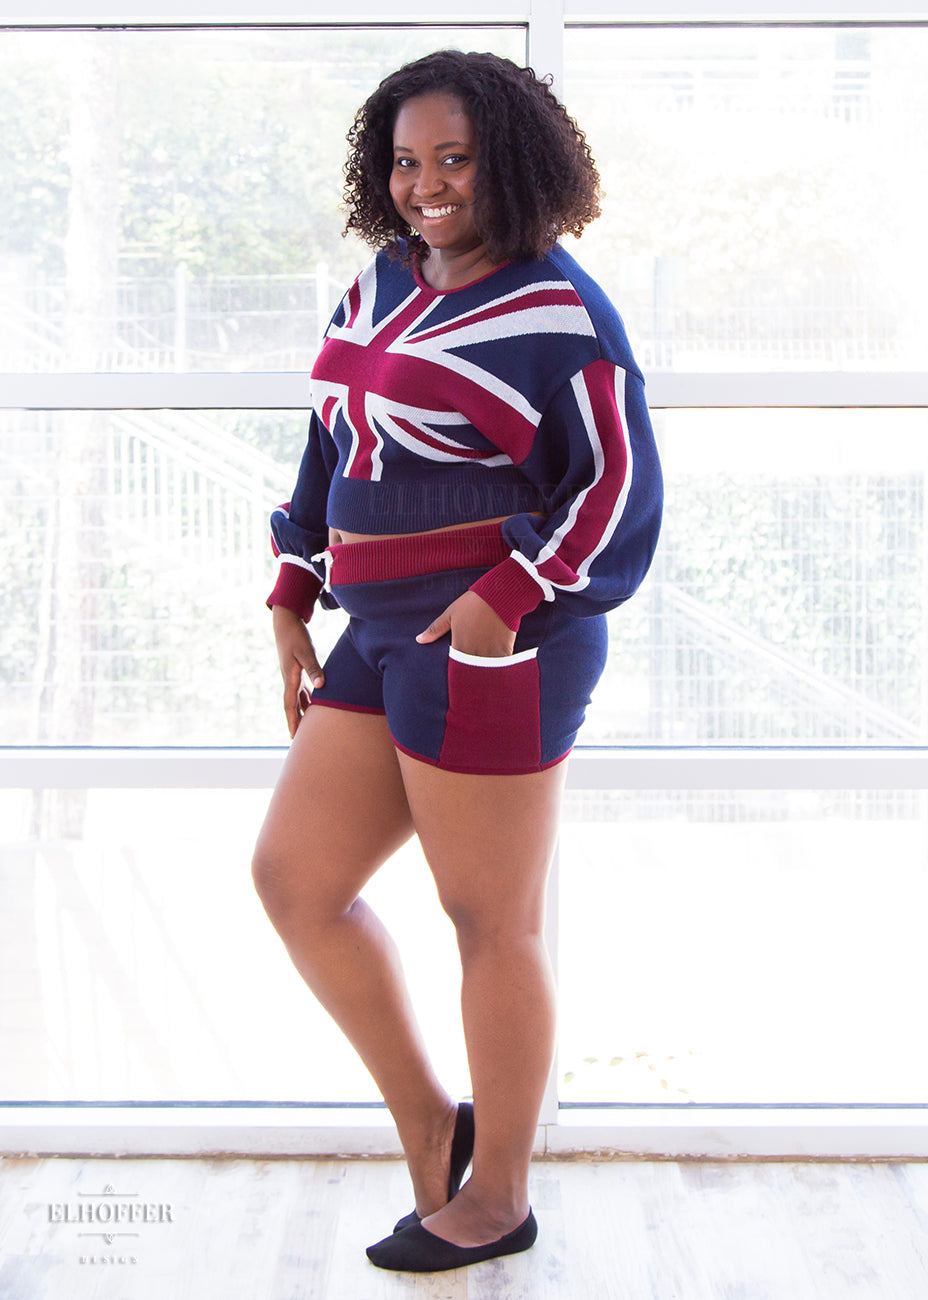 Maydelle, a medium dark skinned XL model with short curly brown hair, is wearing the red, white and blue knit oversized crop top with bishop sleeves. The top has a union jack across the chest and continuing into the sleeves. The cuffs are red with a white detail. There is also a red detail at the neckline.